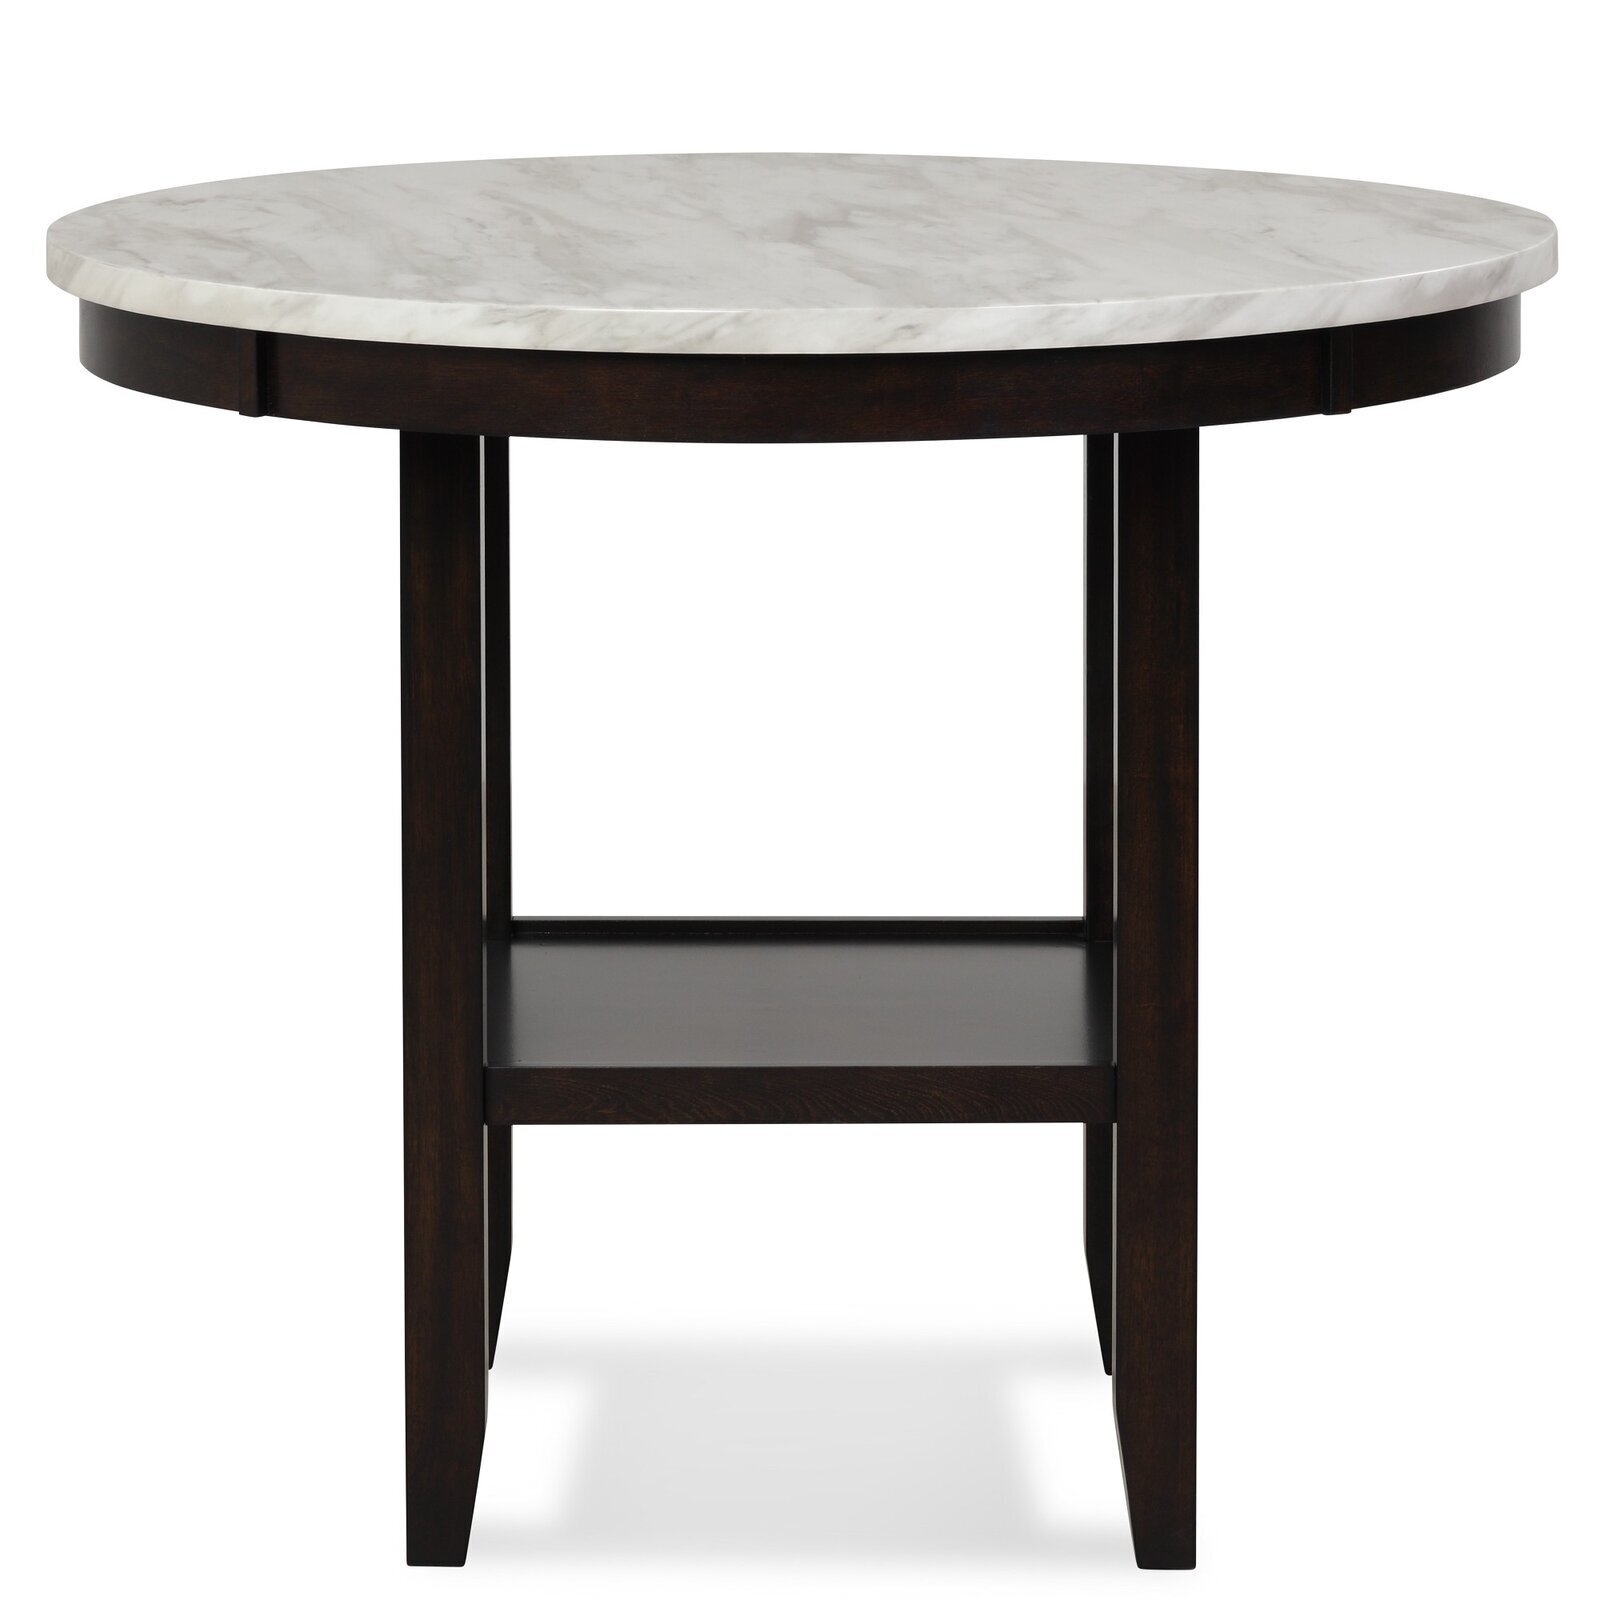 Marble Table With A Thick Black Wooden Frame 